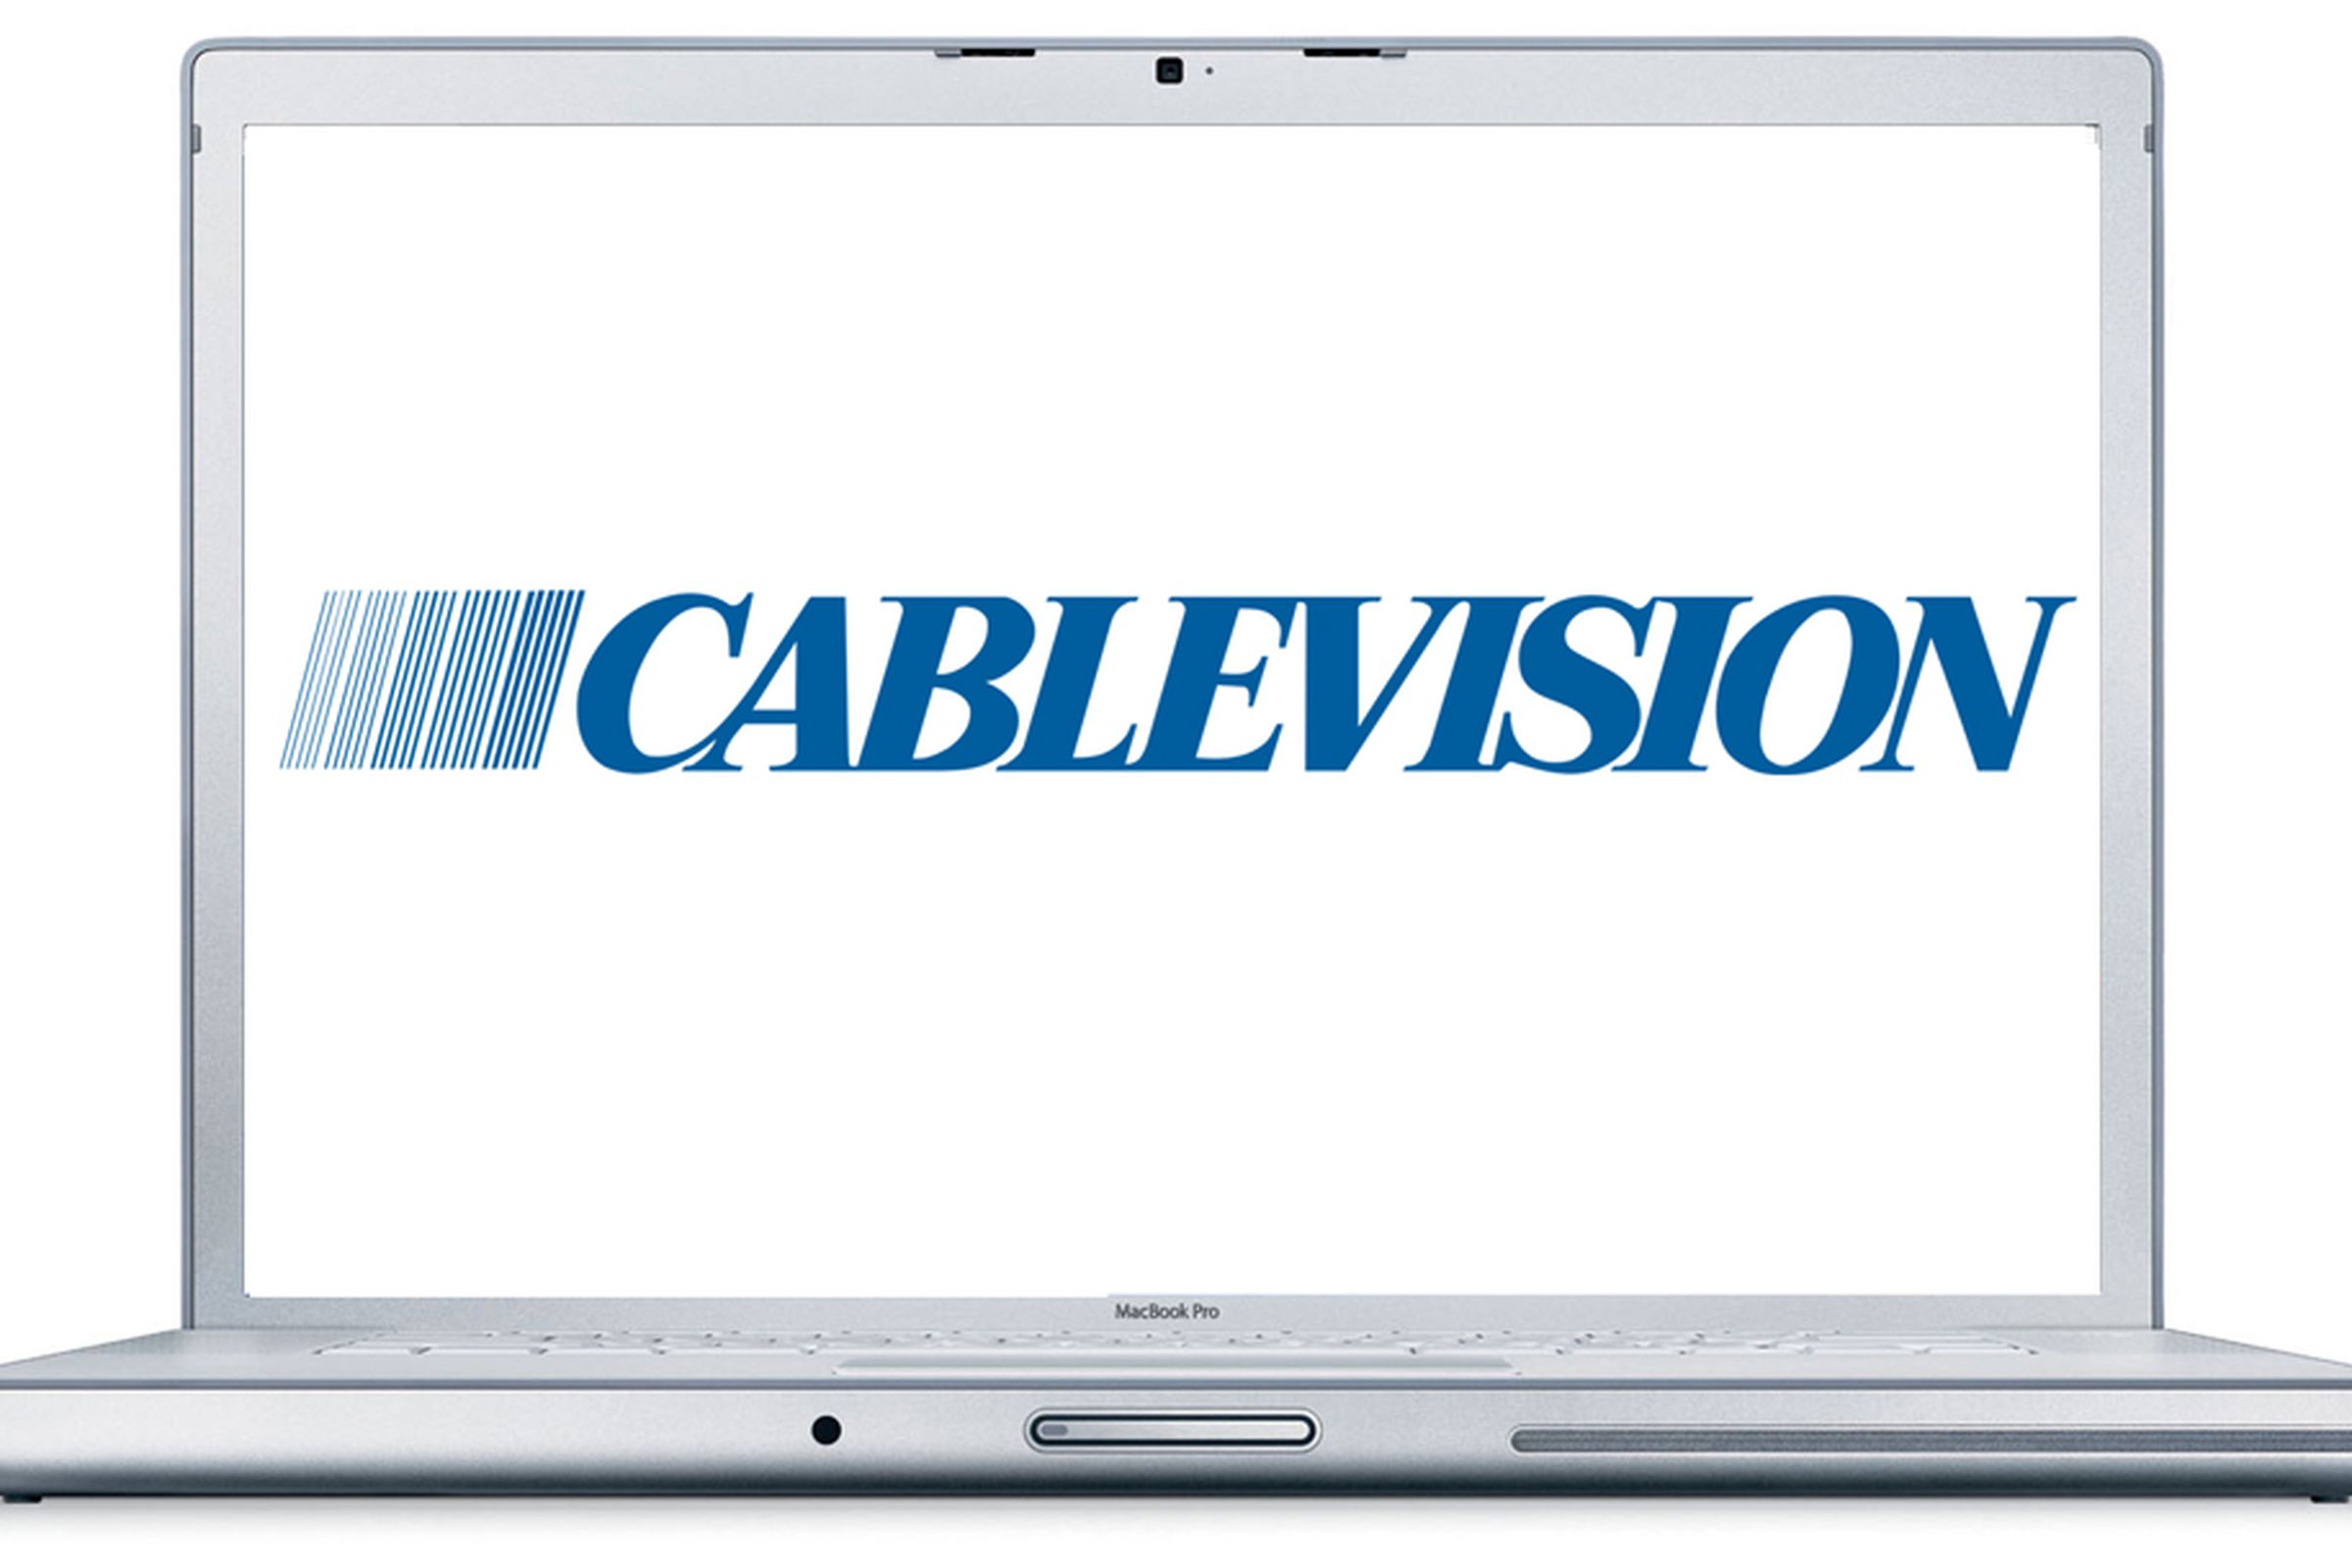 Cablevision Computer